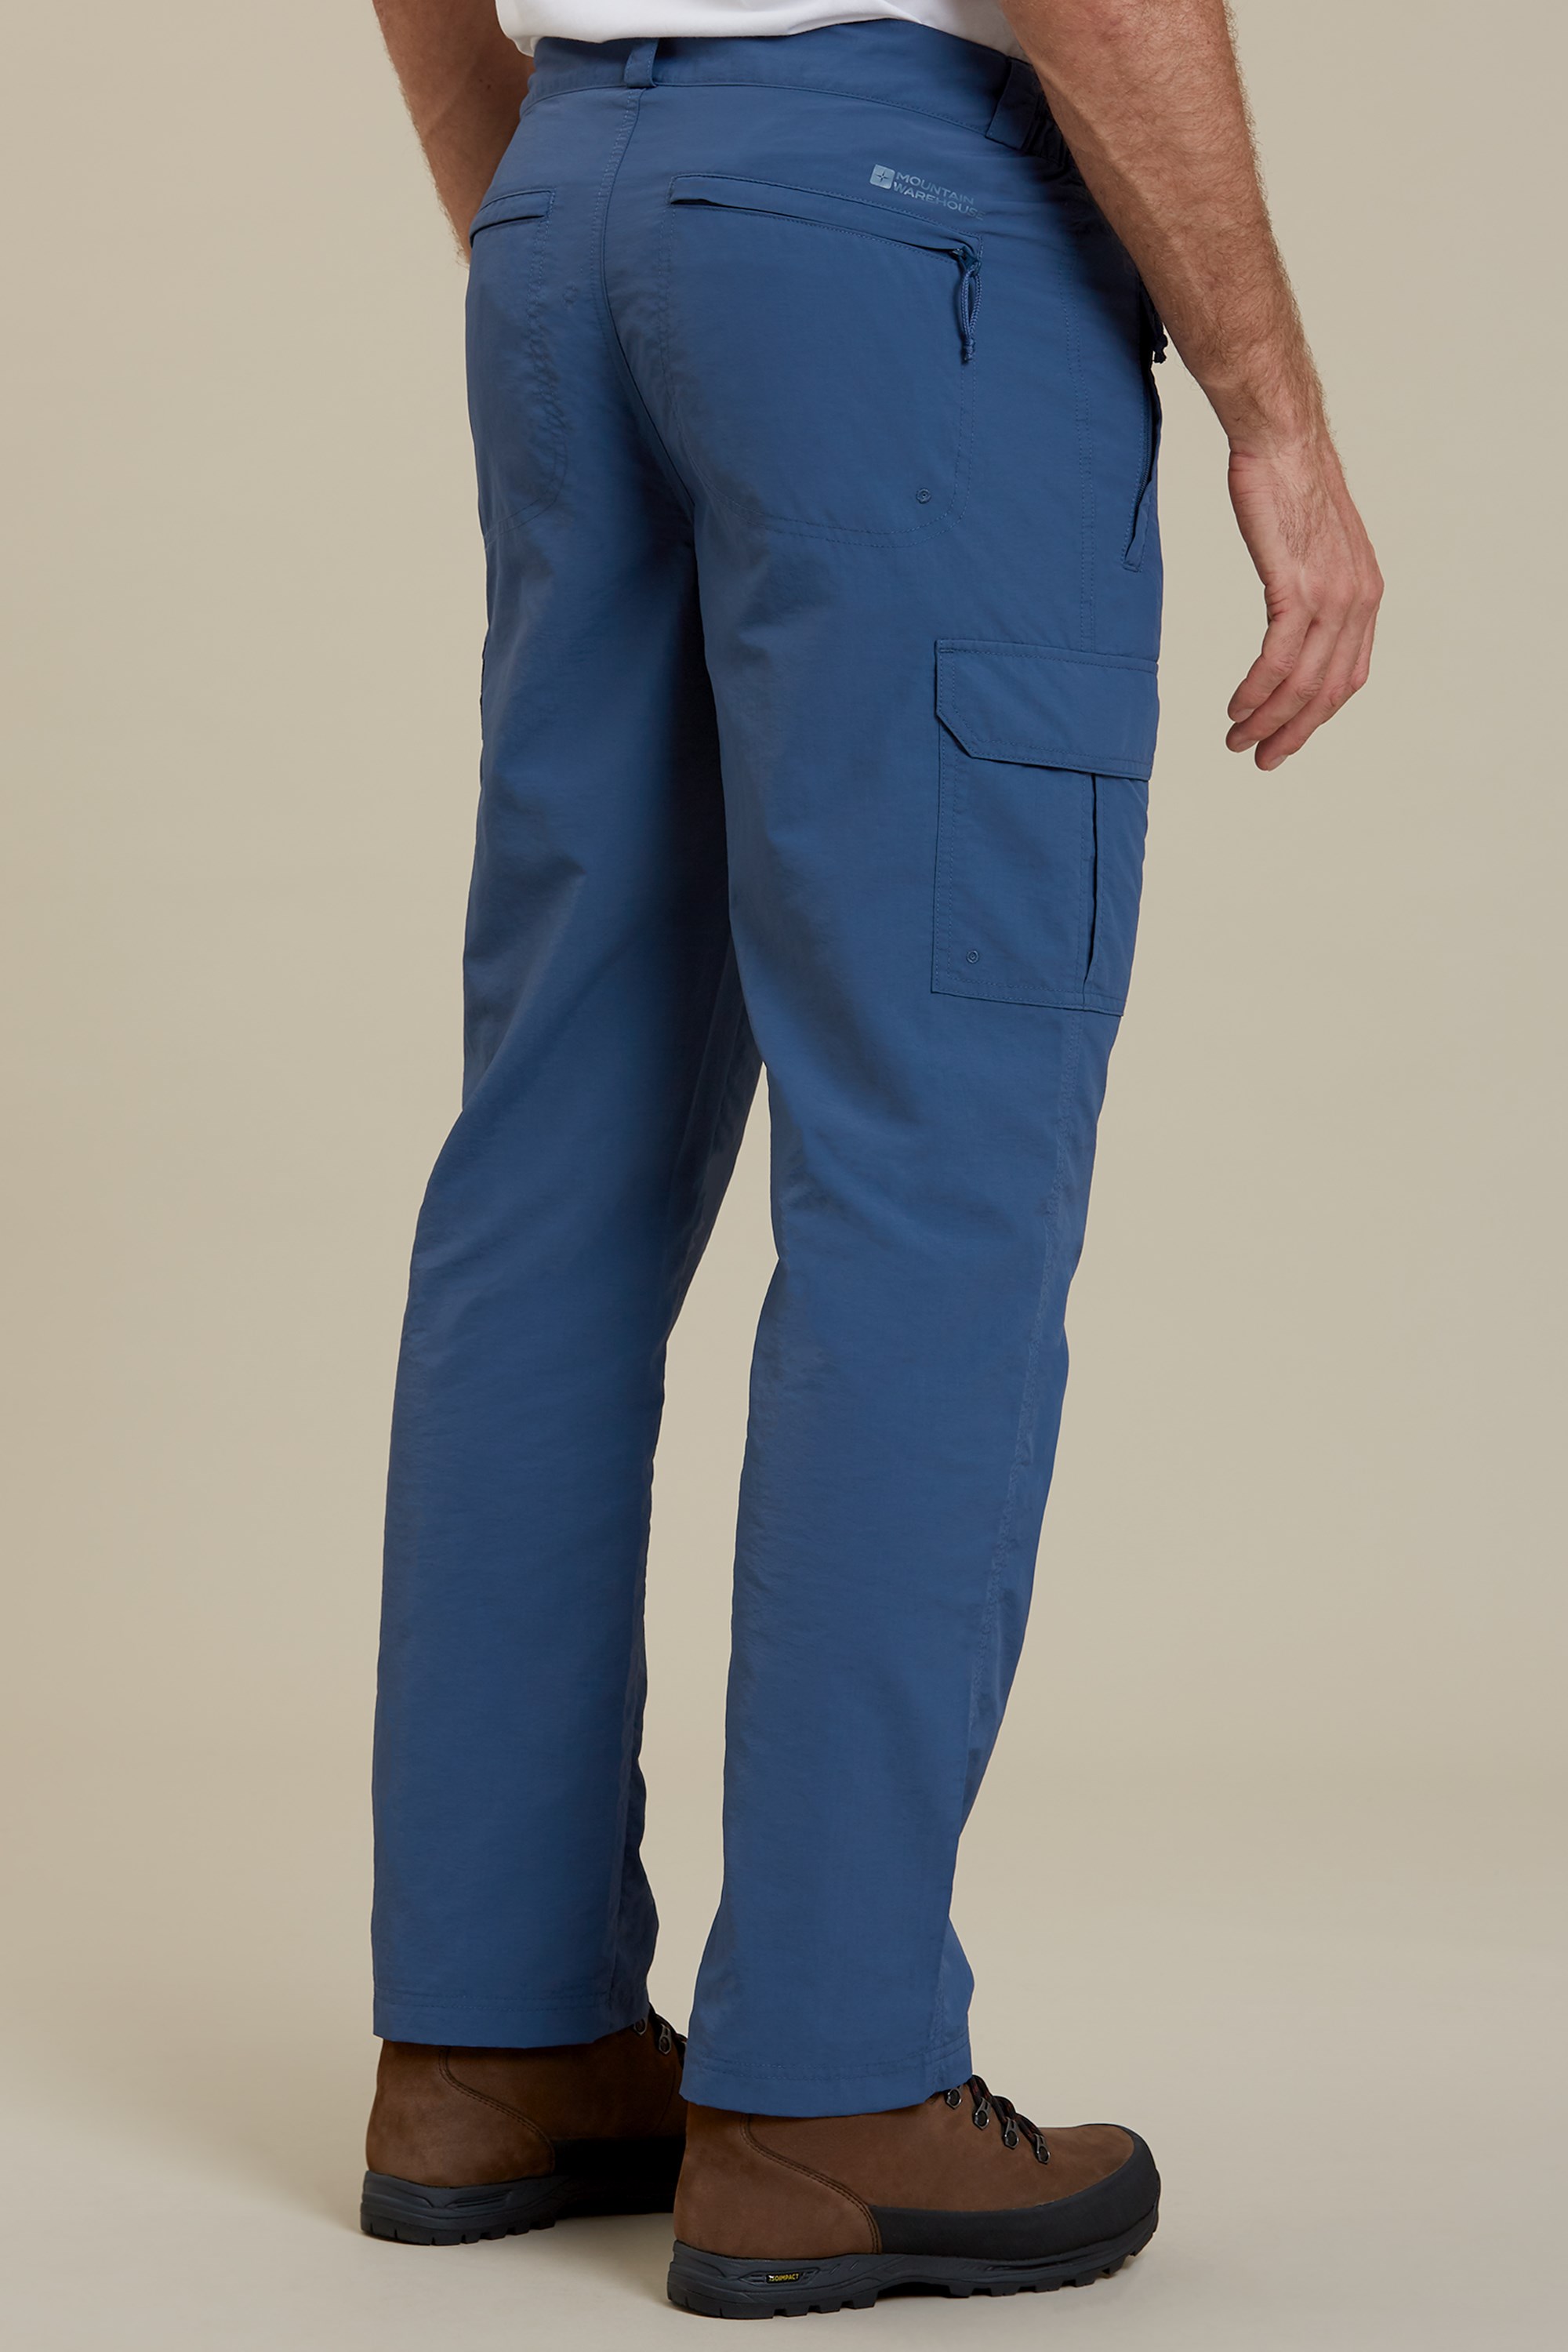 Save 38% Womens Clothing Trousers Mountain Warehouse Lightweight in Blue Slacks and Chinos Full-length trousers 